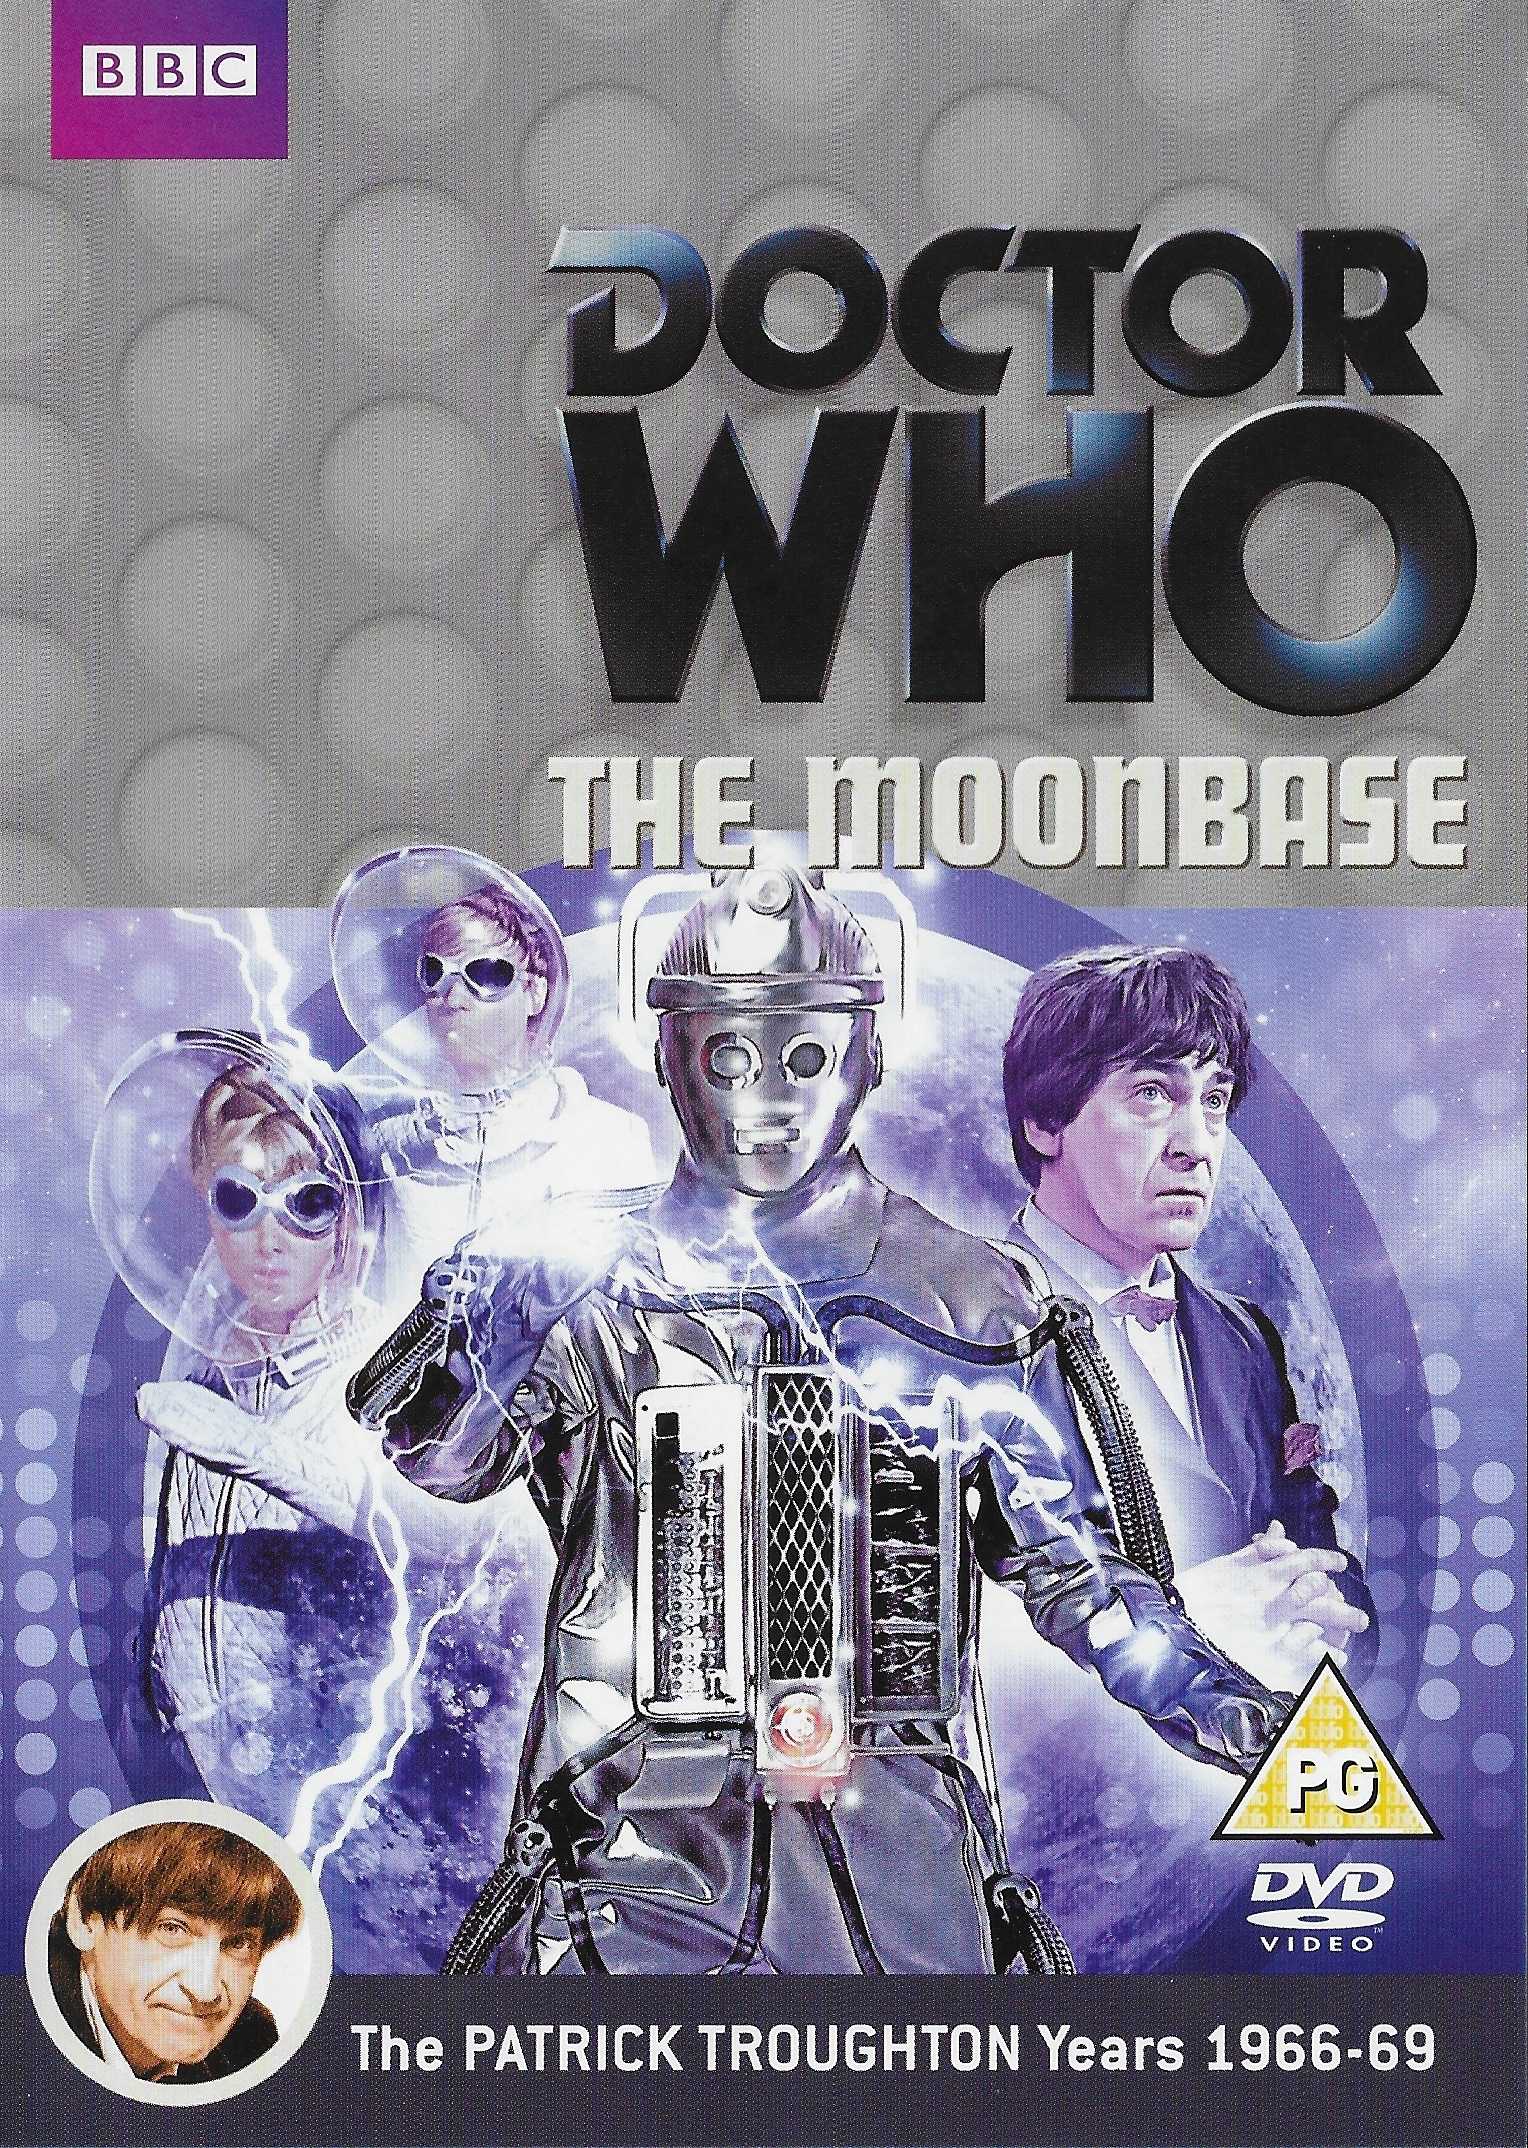 Picture of BBCDVD 3698 Doctor Who - The moonbase by artist Kit Pedler from the BBC records and Tapes library